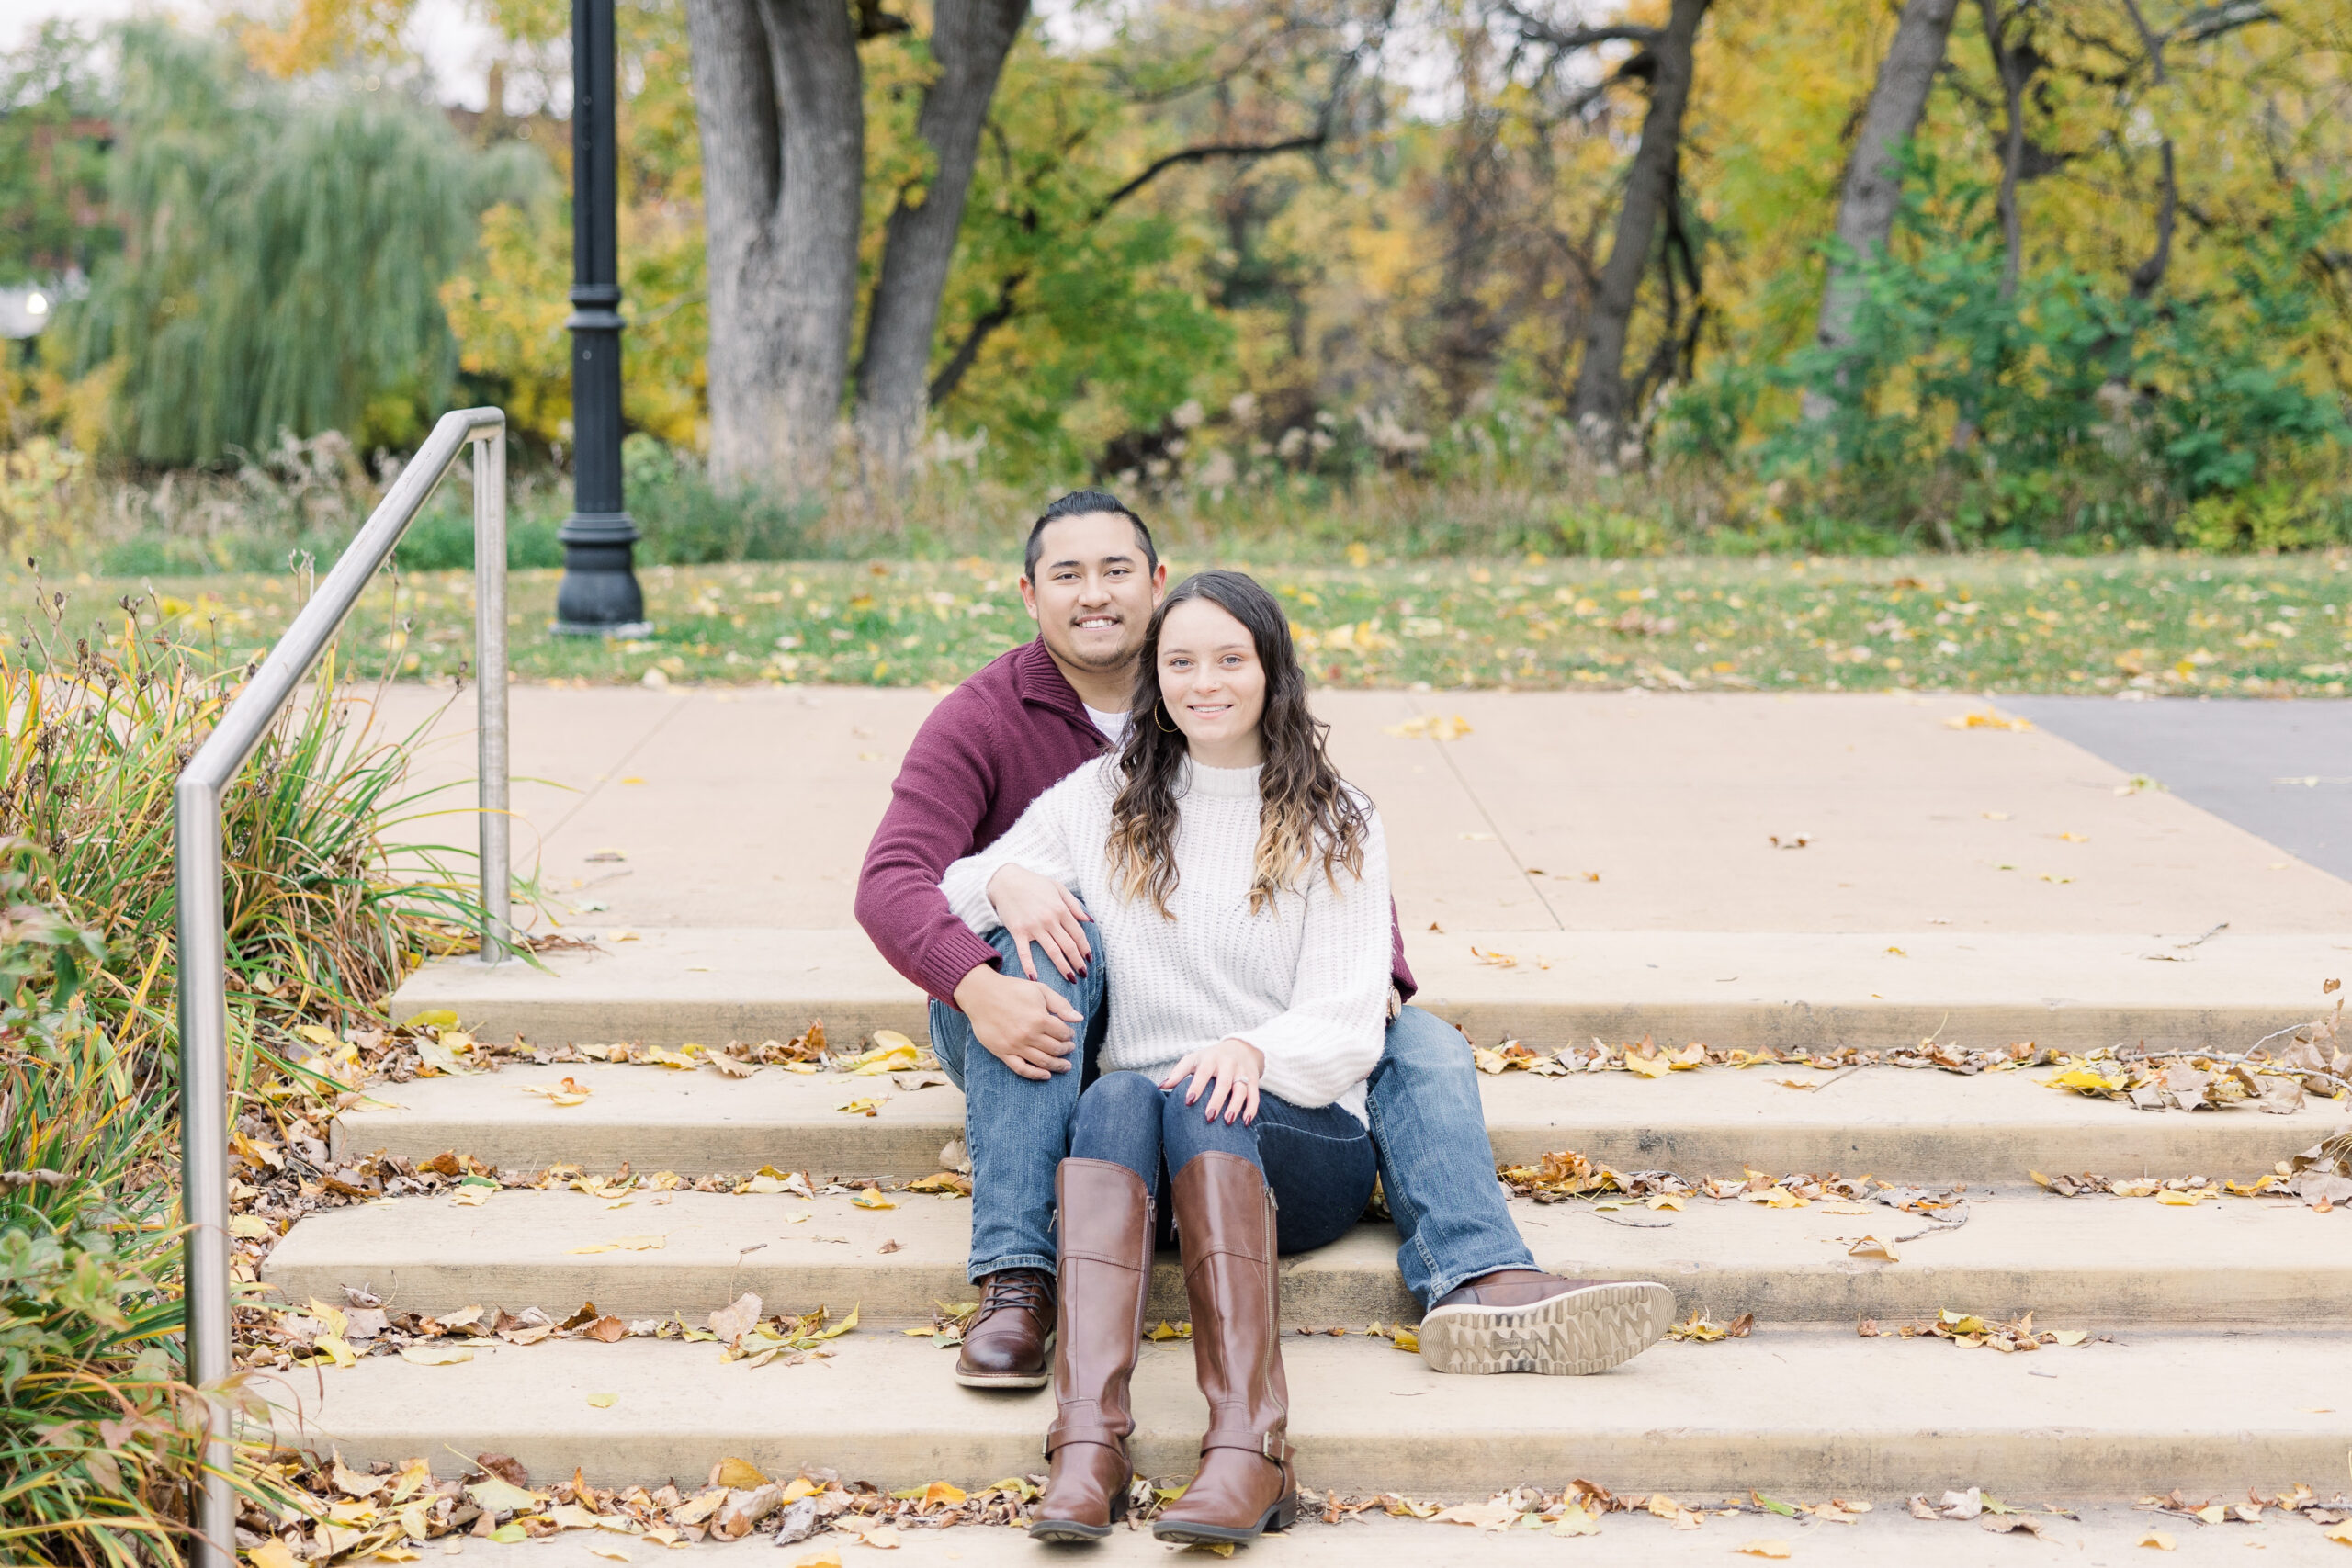 Downtown Anoka Fall Engagement Session near the riverside in October